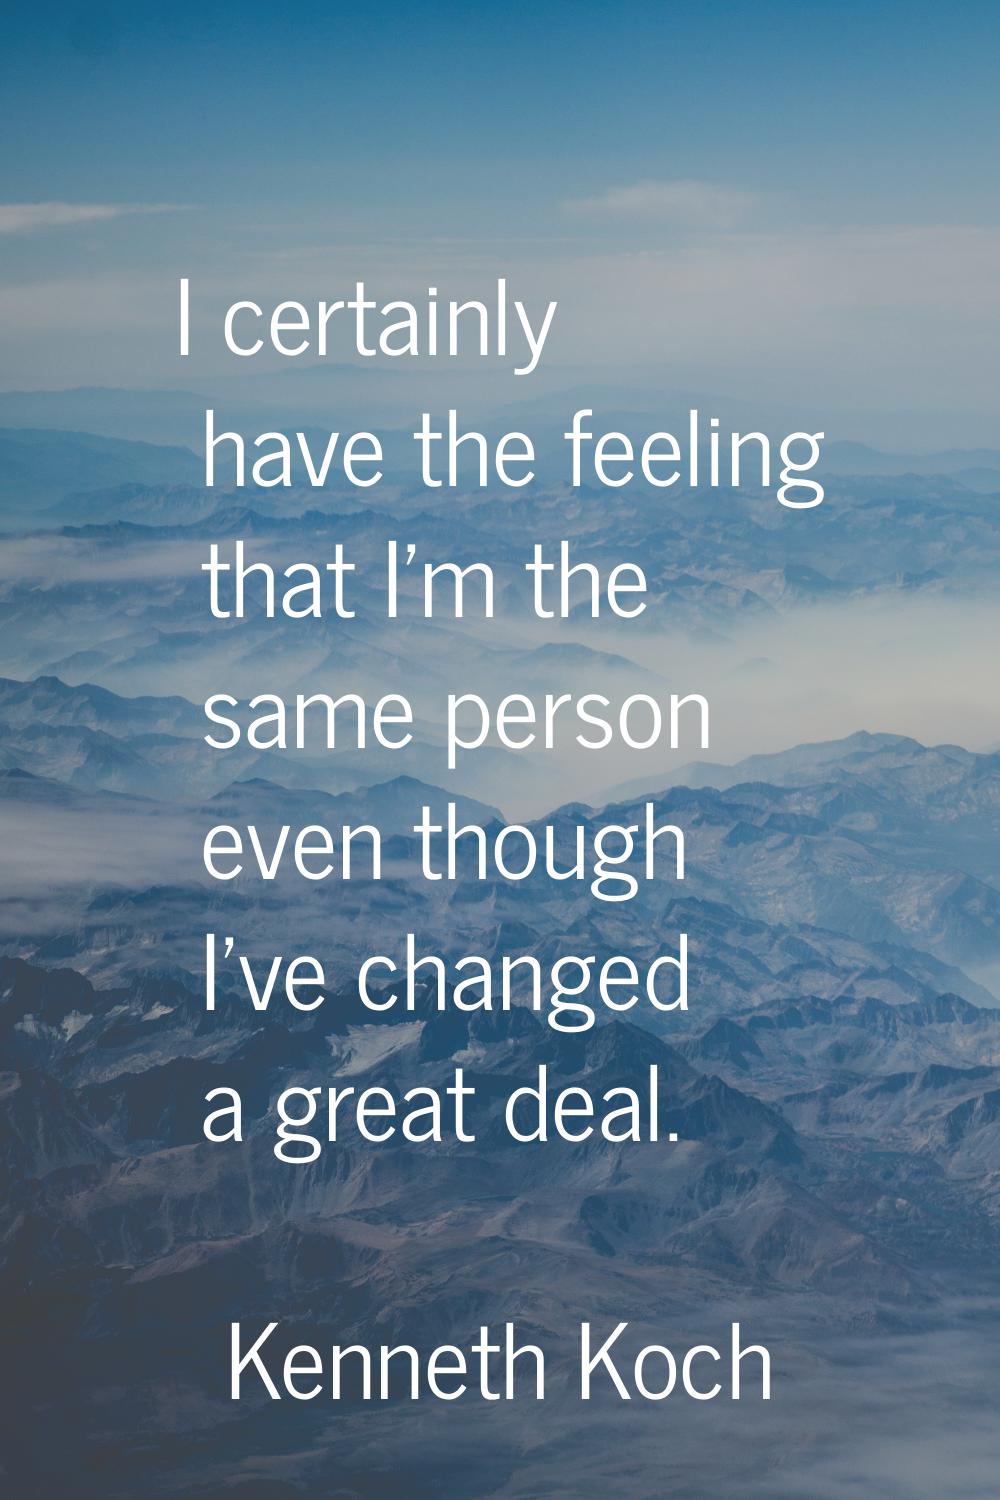 I certainly have the feeling that I'm the same person even though I've changed a great deal.